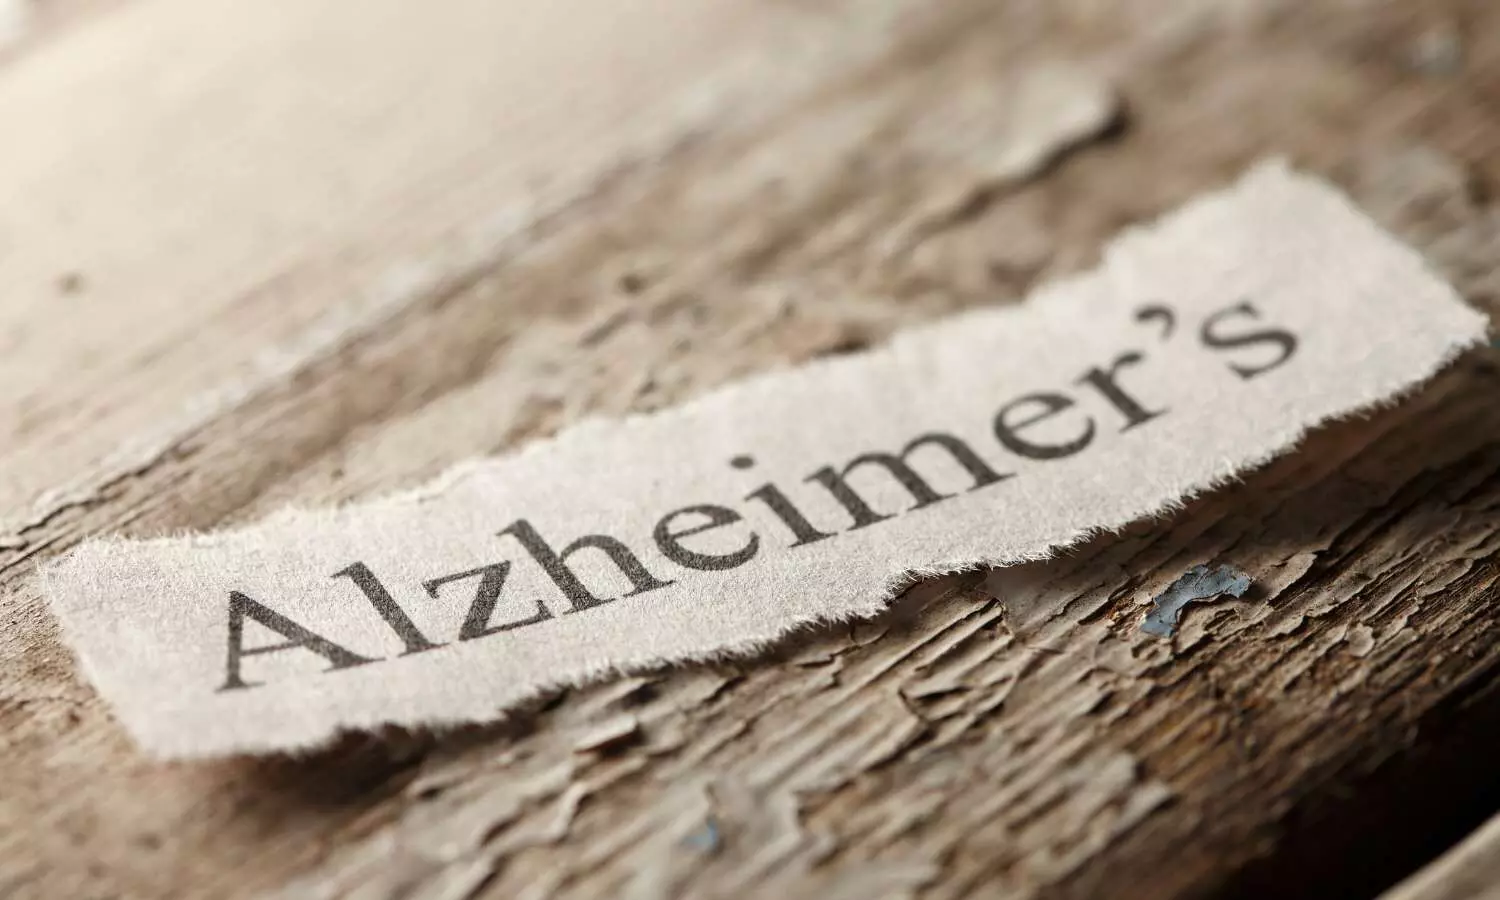 MIND and Mediterranean diets linked to fewer Alzheimers plaques and tangles